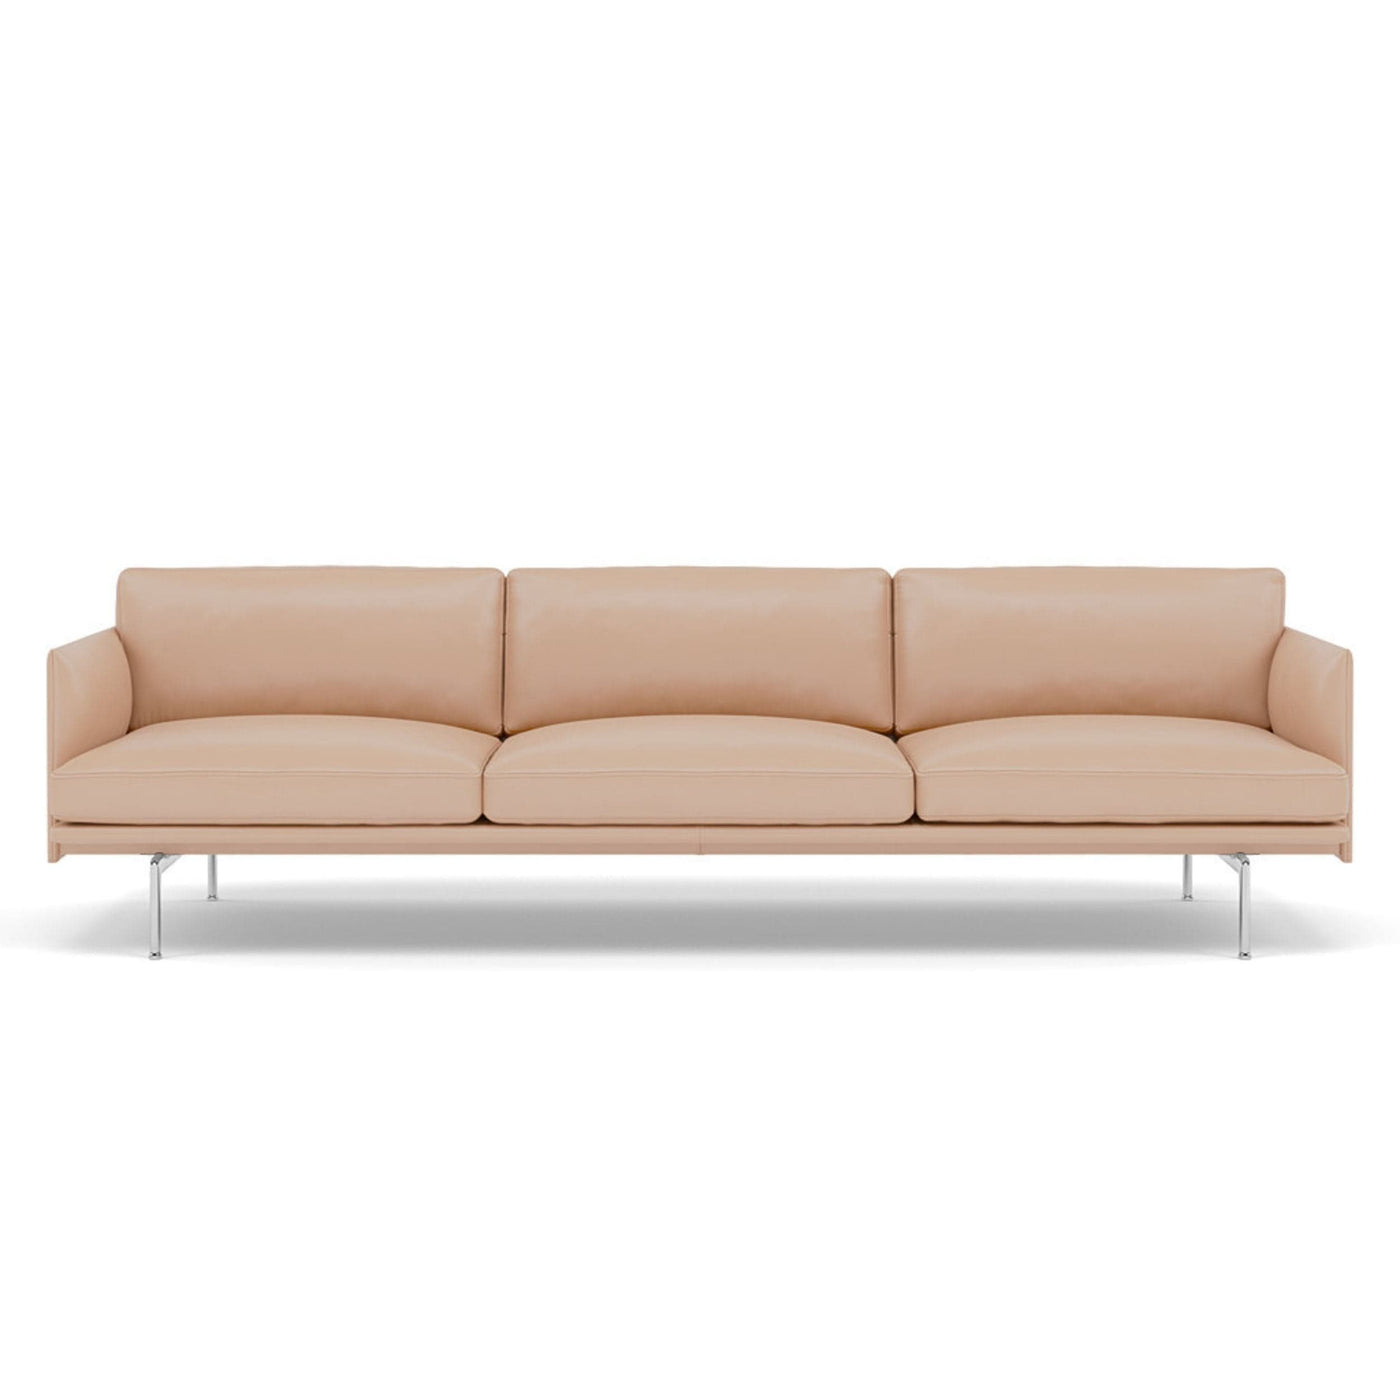 muuto outline 3.5 seater sofa in beige refine leather and polished aluminium legs. Made to order from someday designs. #colour_beige-refine-leather